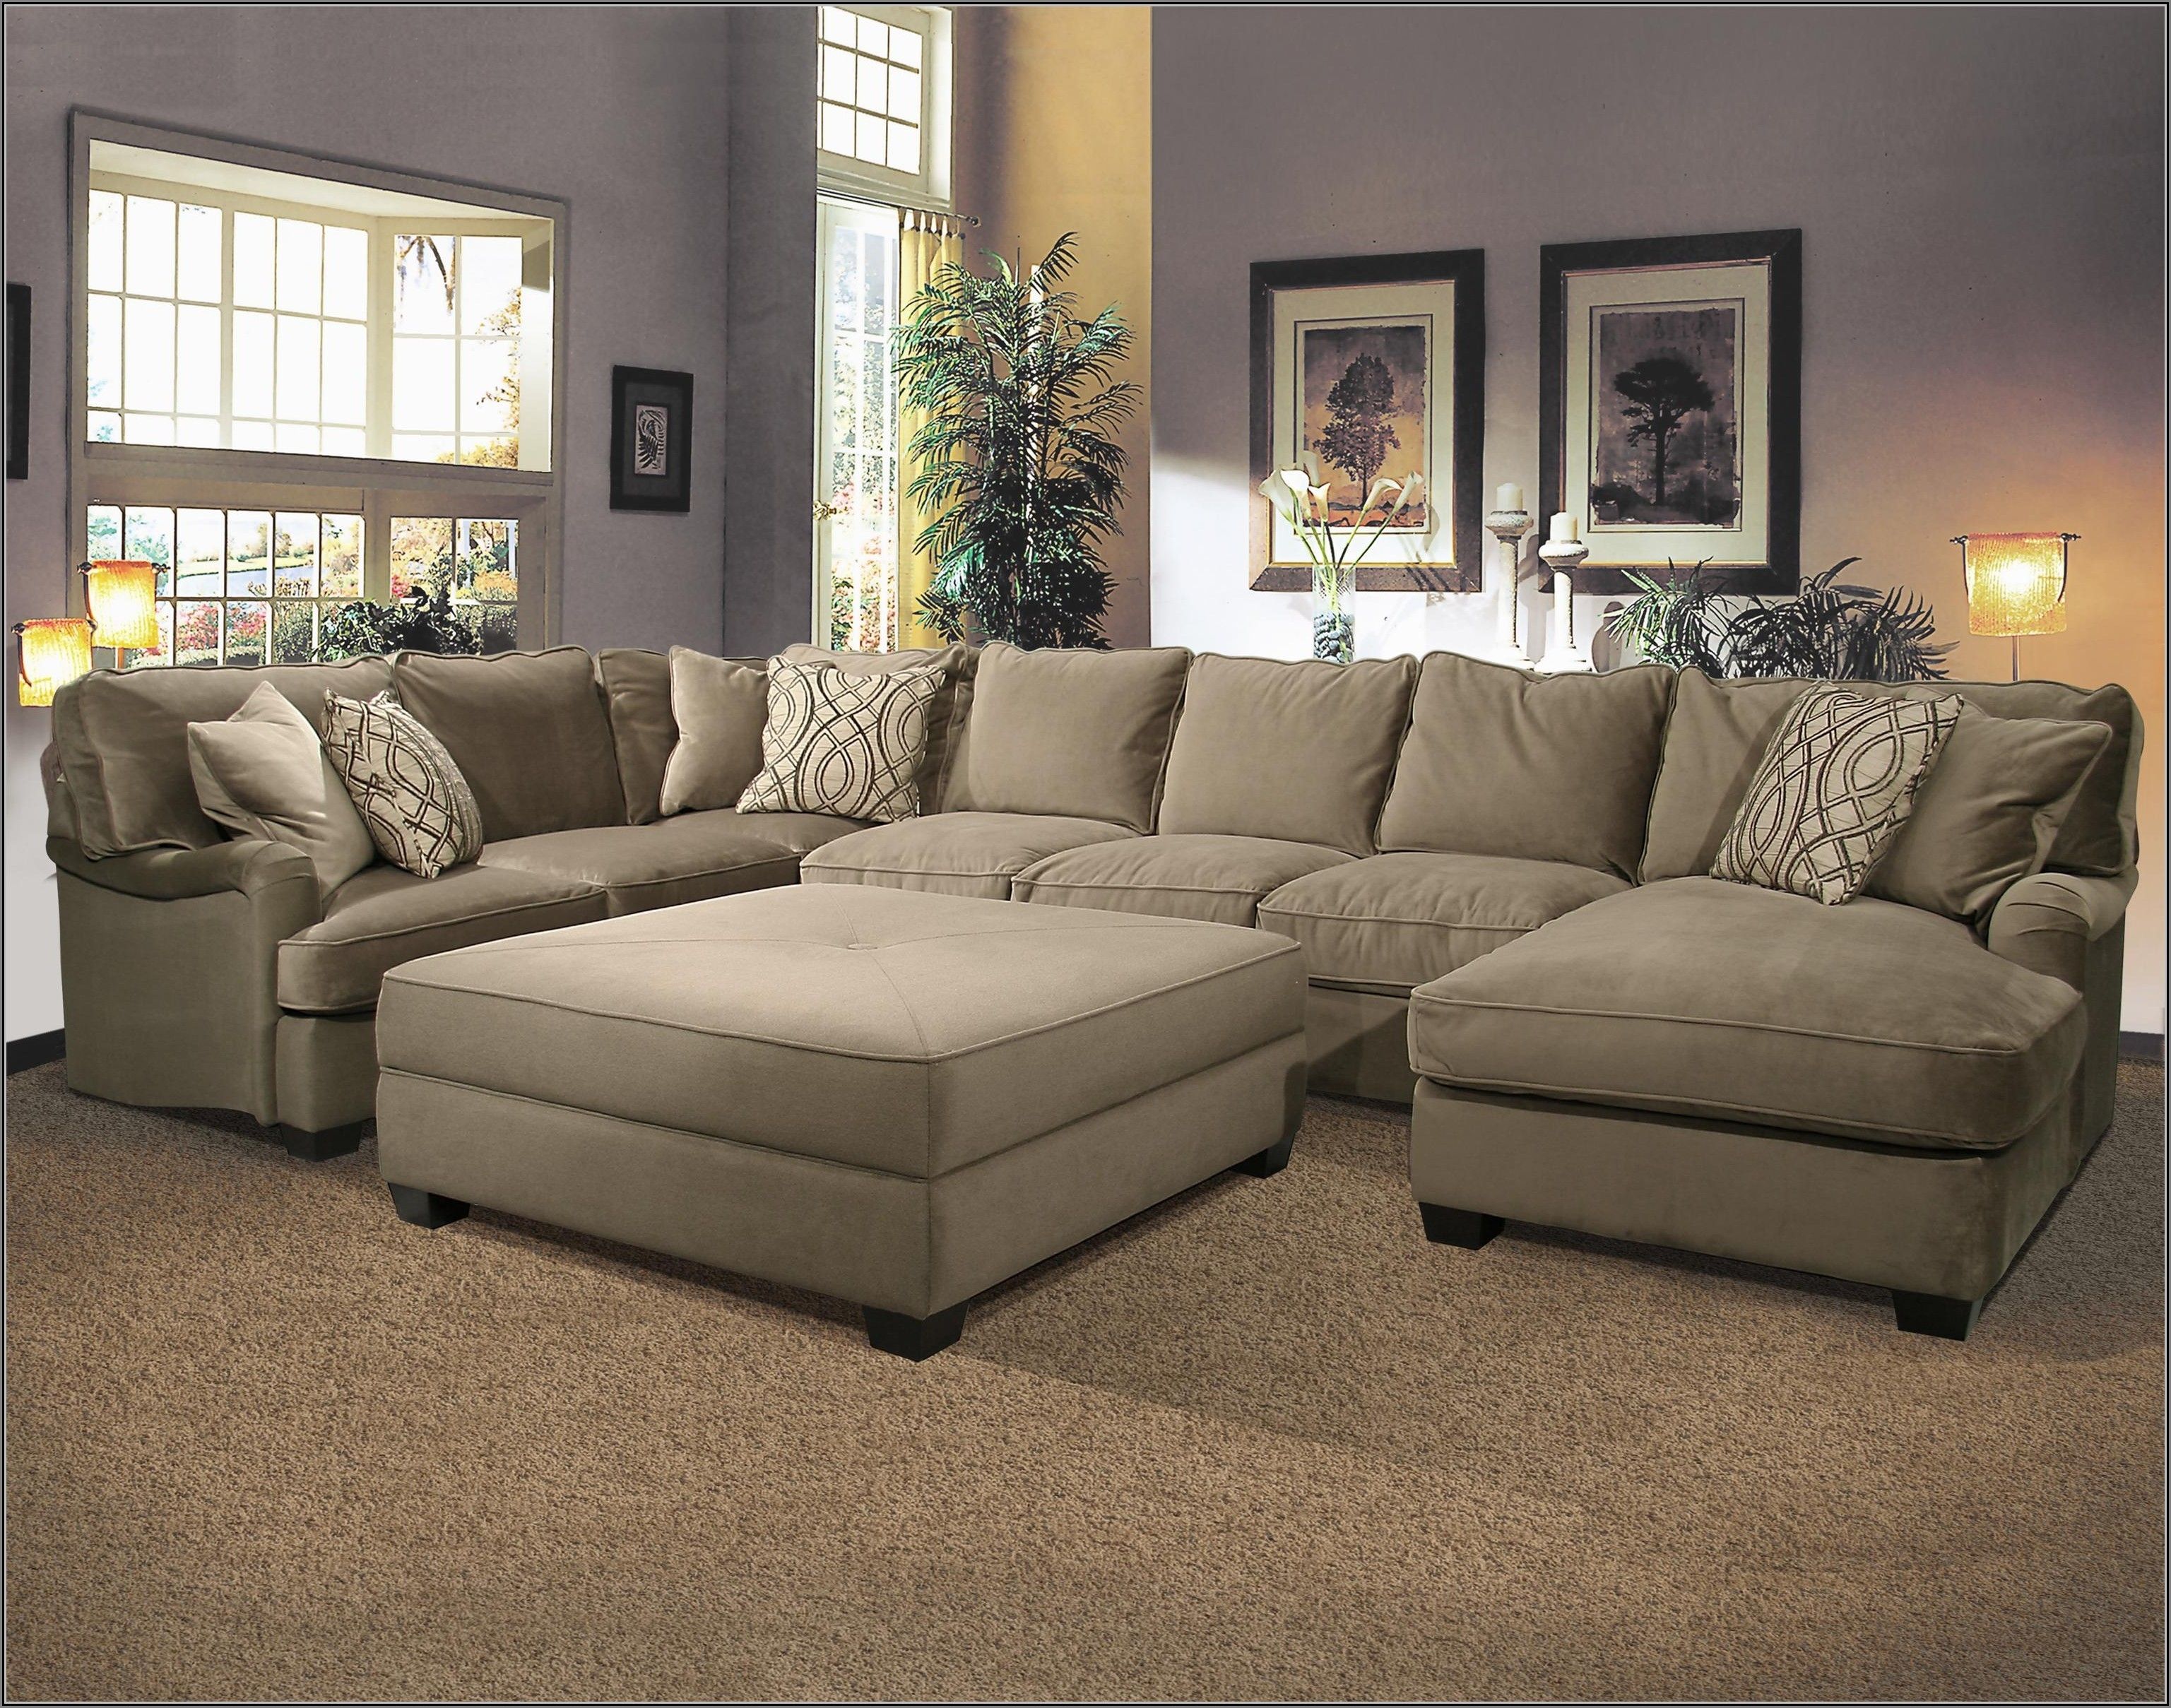 10 Top Couches With Large Ottoman Sofa Ideas